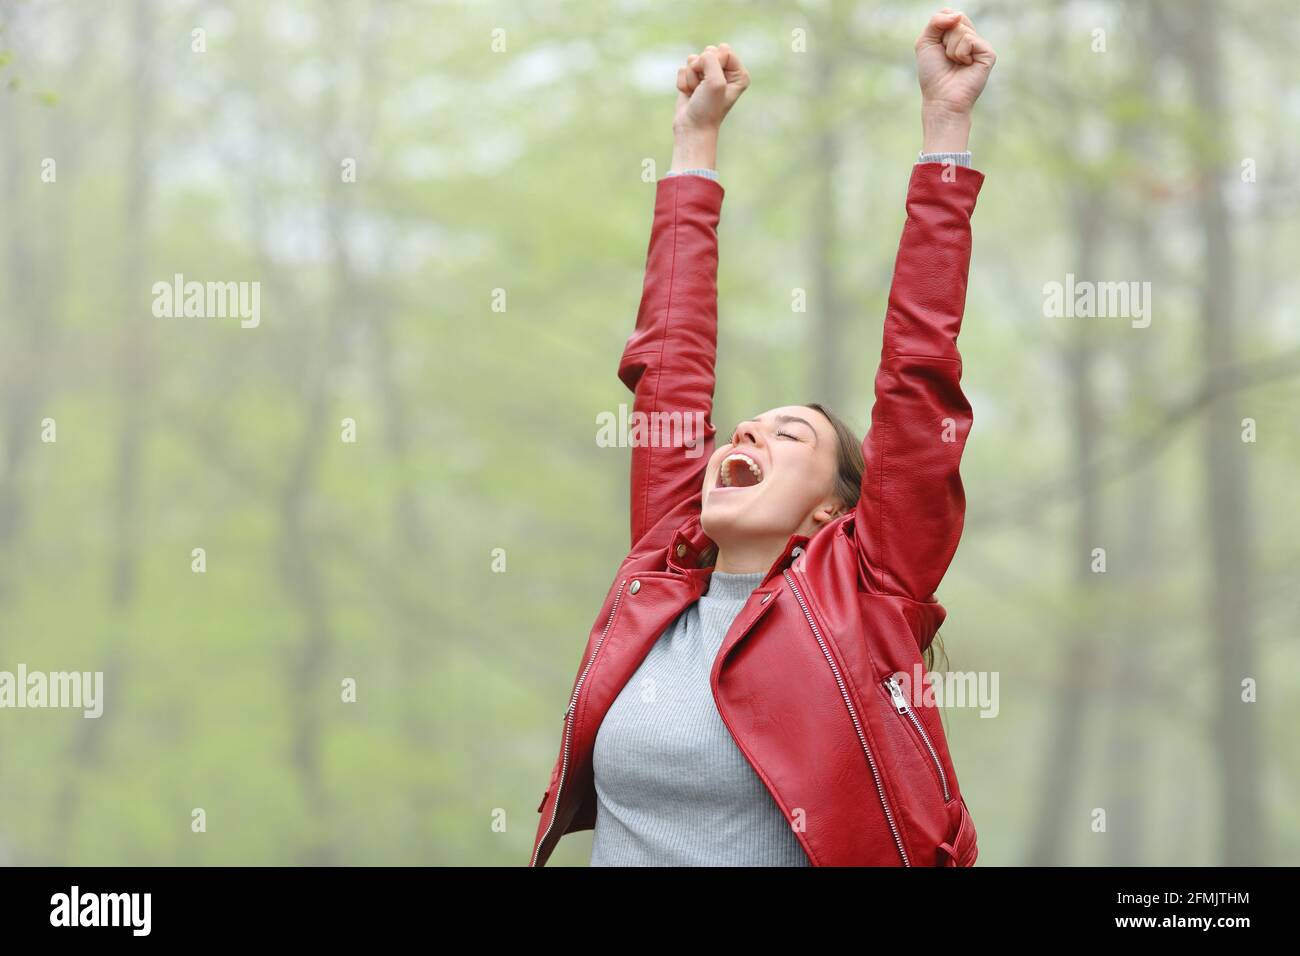 Woman in red excited raising arms screaming in a forest Stock Photo